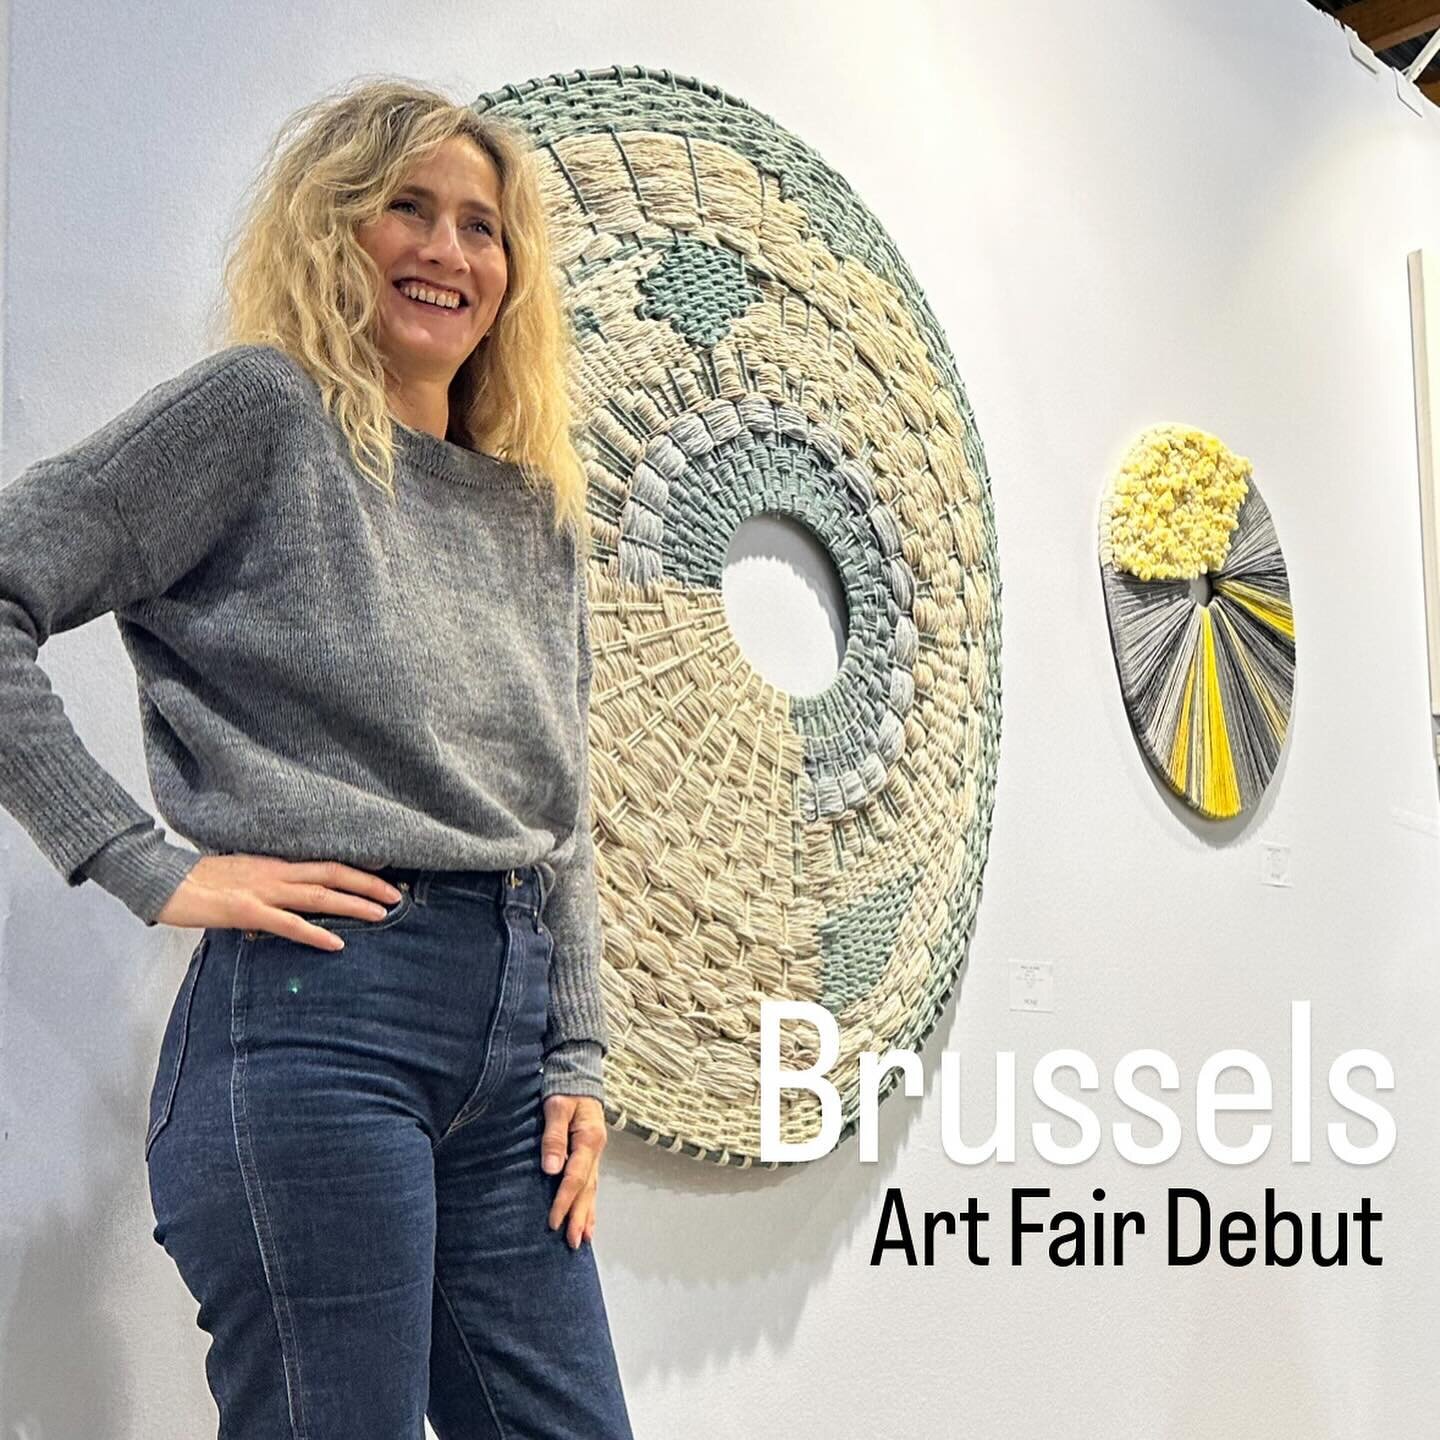 Reflecting on the vibrant atmosphere and inspiring conversations at my art fair debut in Brussels last weekend. Grateful for the chance to share my passion with the art-loving community. Excitingly, more showings are on the horizon before the year en